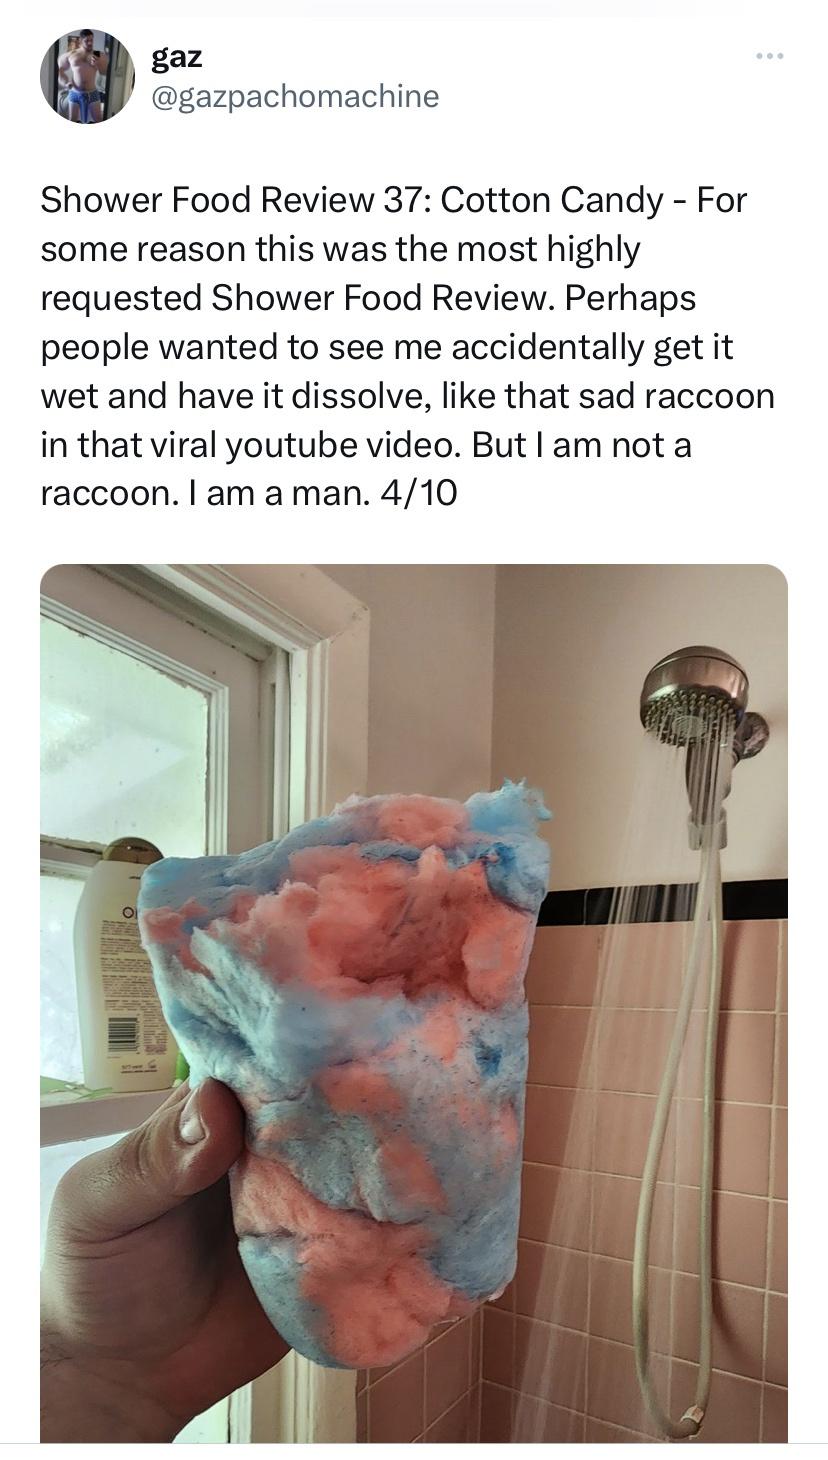 funny tweets and memes - shoulder - gaz ... Shower Food Review 37 Cotton Candy For some reason this was the most highly requested Shower Food Review. Perhaps people wanted to see me accidentally get it wet and have it dissolve, that sad raccoon in that vi